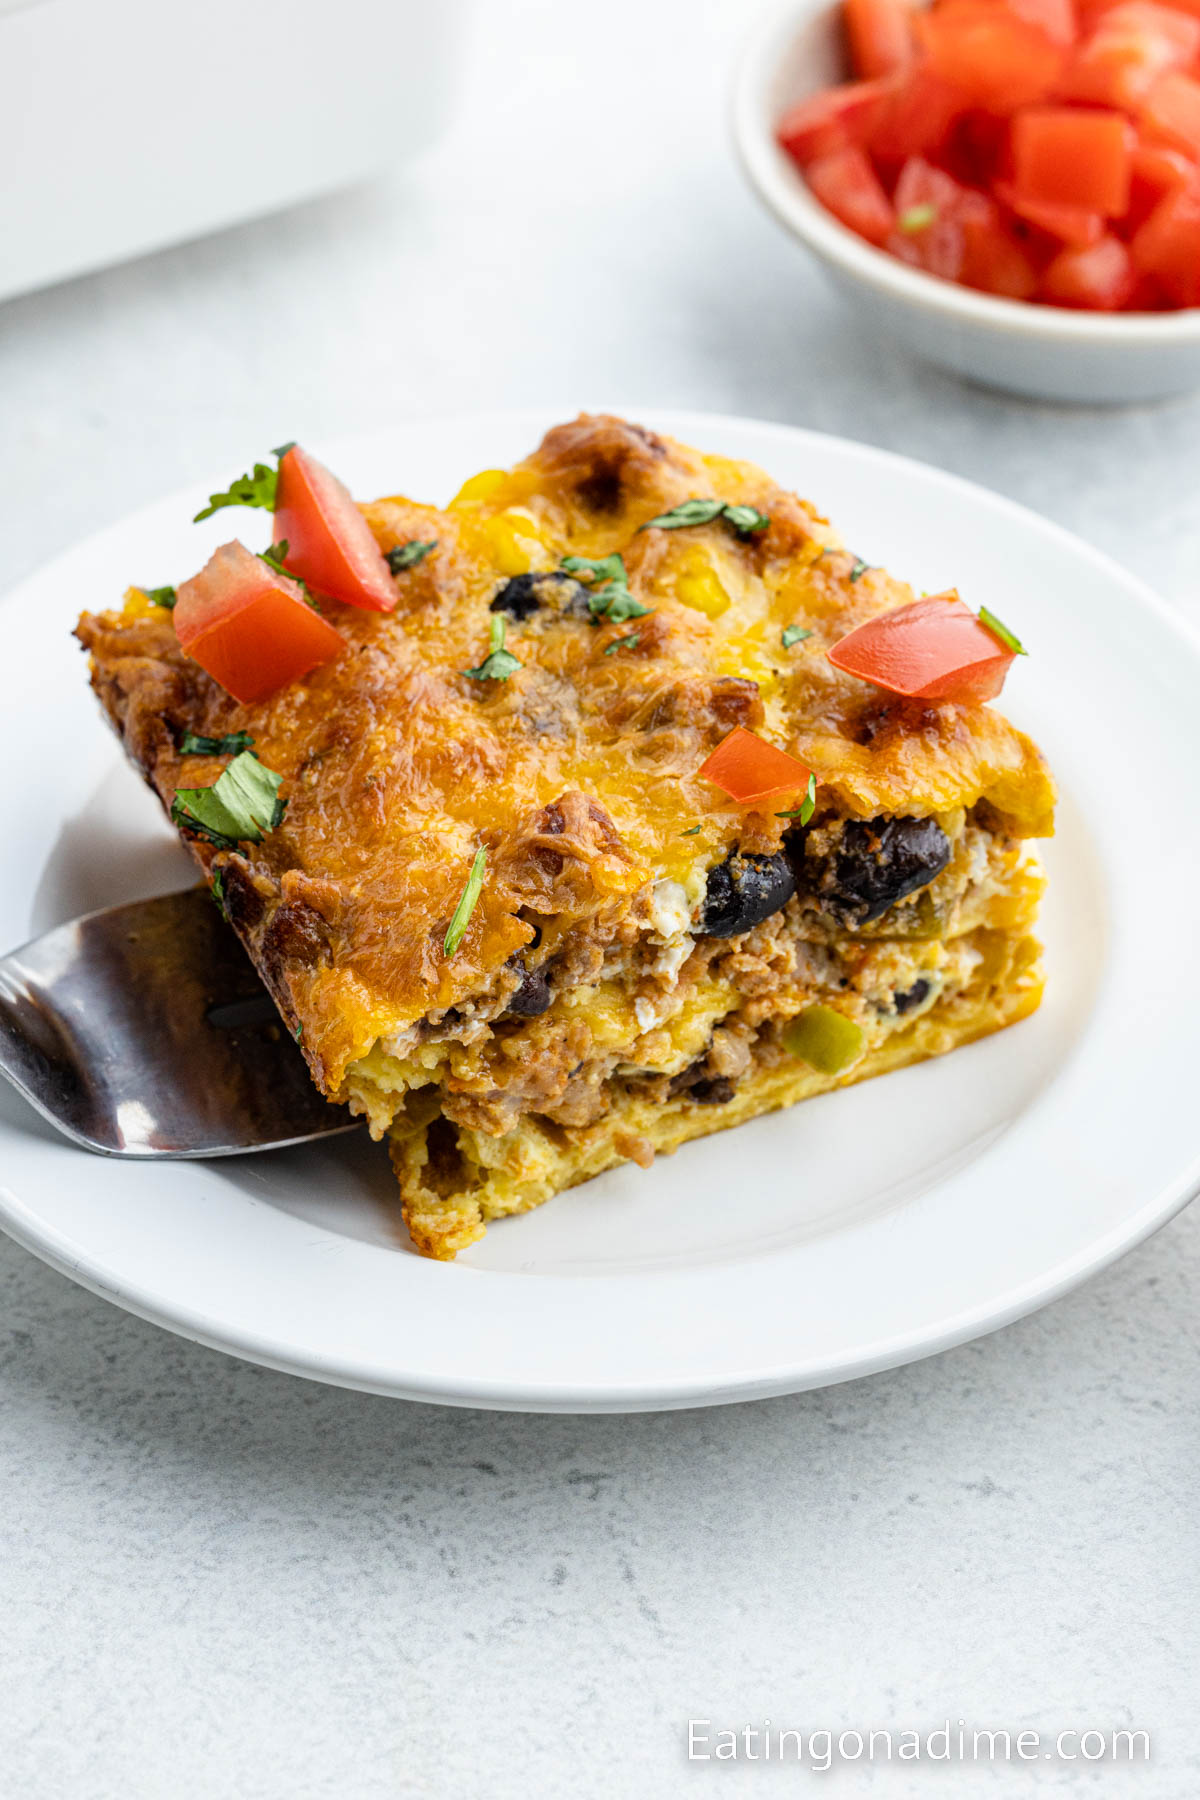 A slice of Mexican breakfast casserole on a plate